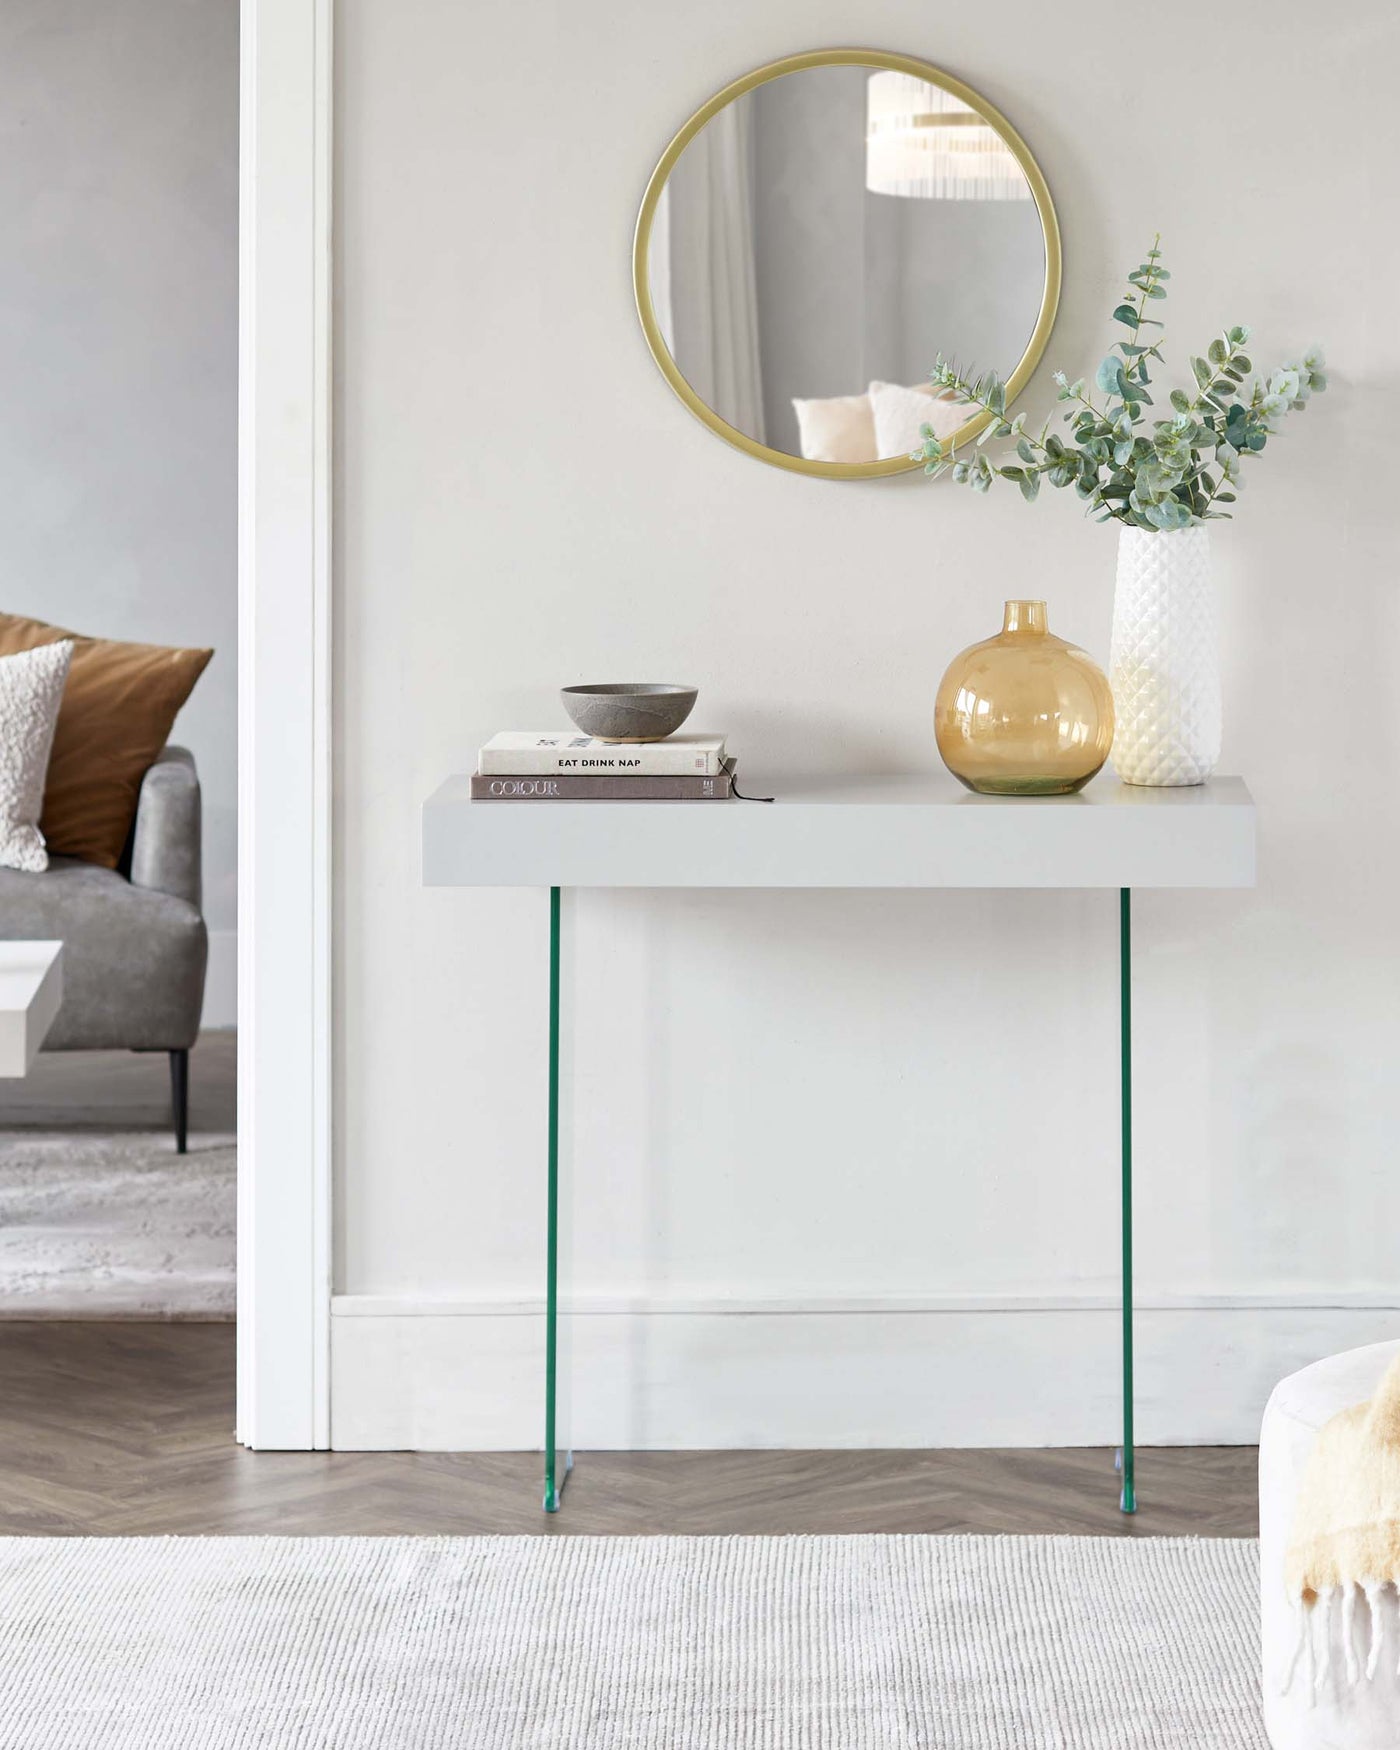 A modern minimalist white console table with slender green metal legs, adorned with decorative items including books, a bowl, a vase, and a round gold-framed mirror hanging above it.